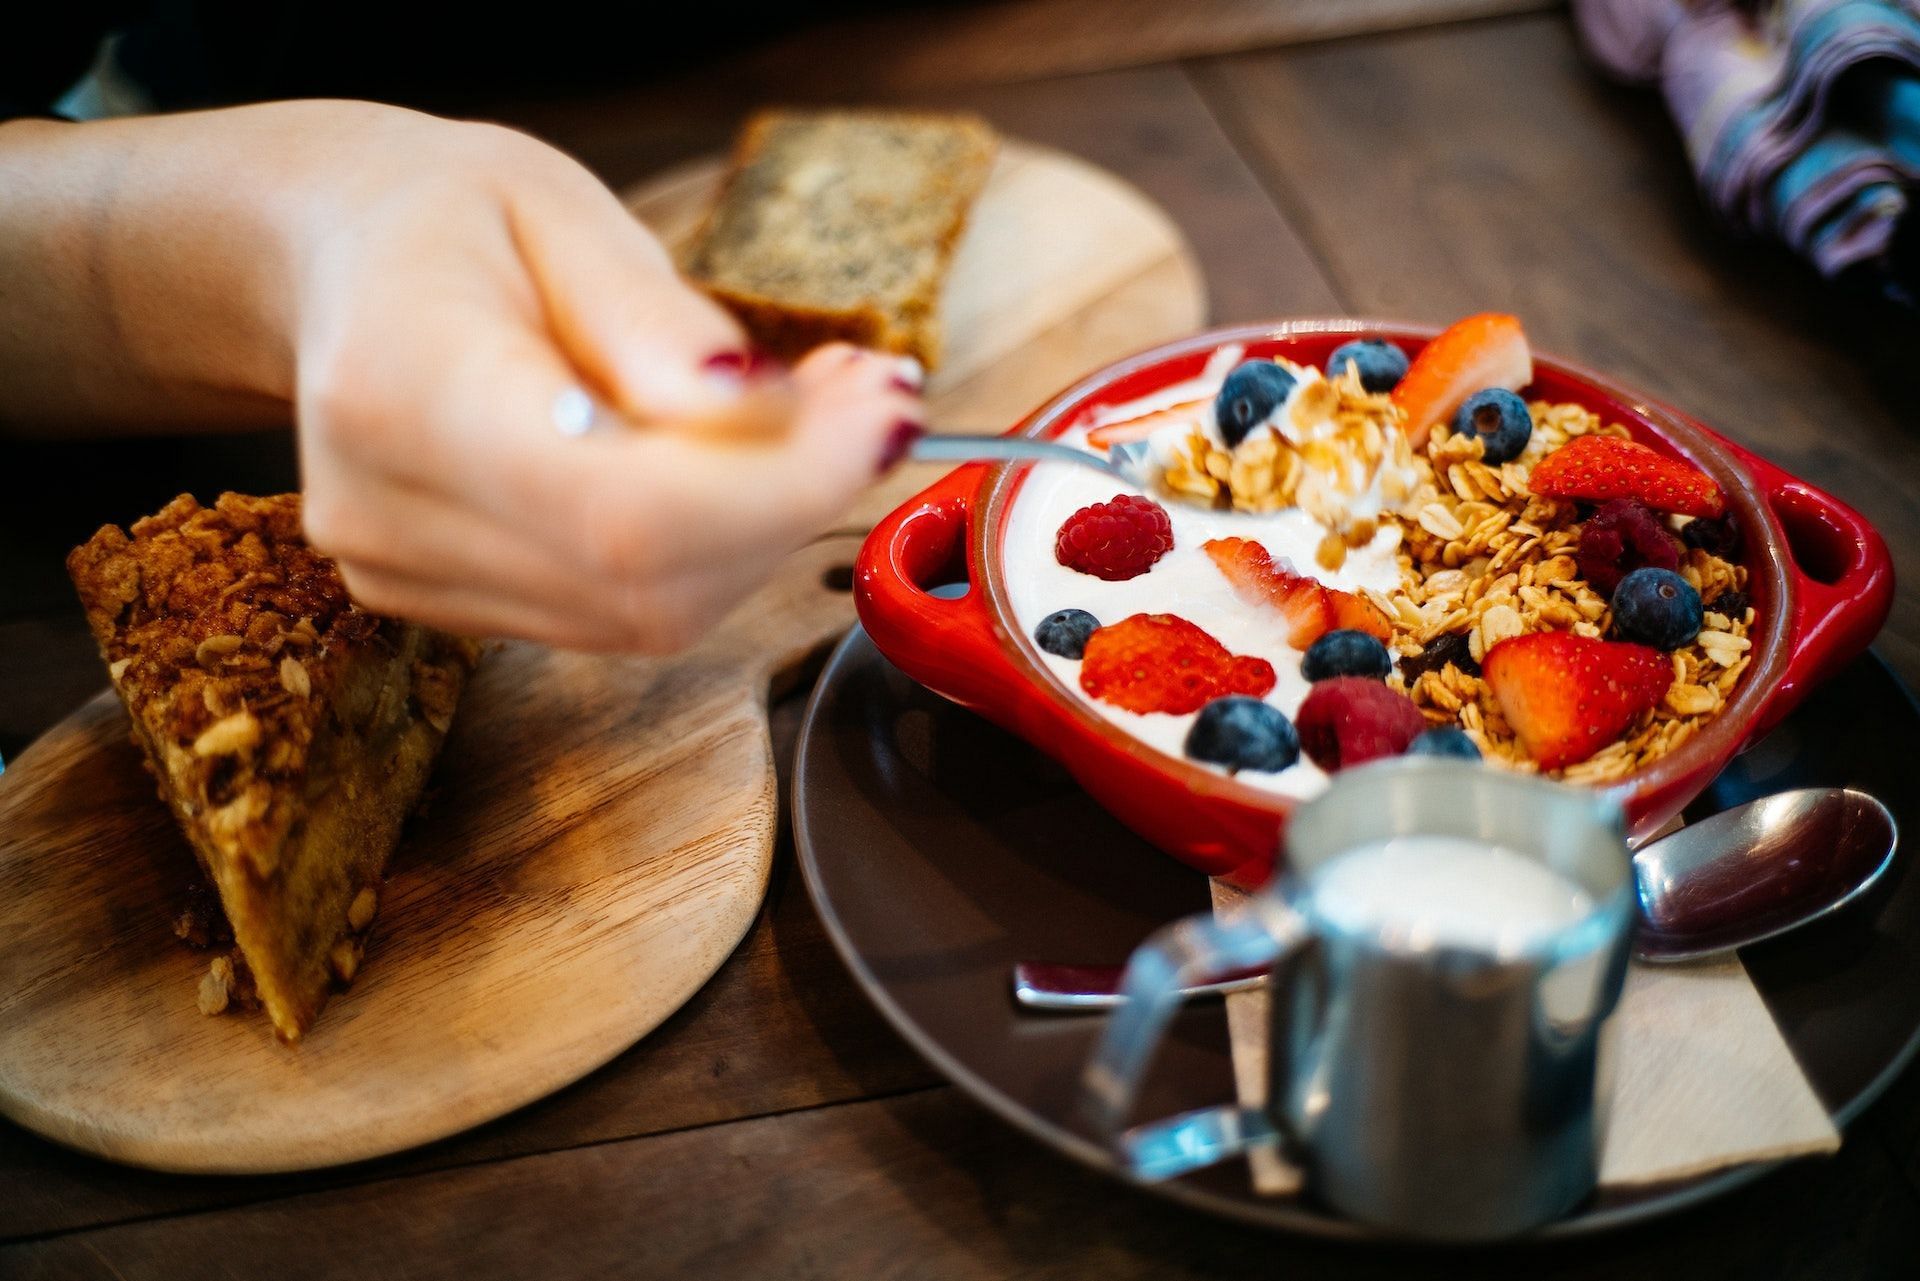 Start your day right with the correct breakfast food options. (Photo via Pexels/Flo Dahm)